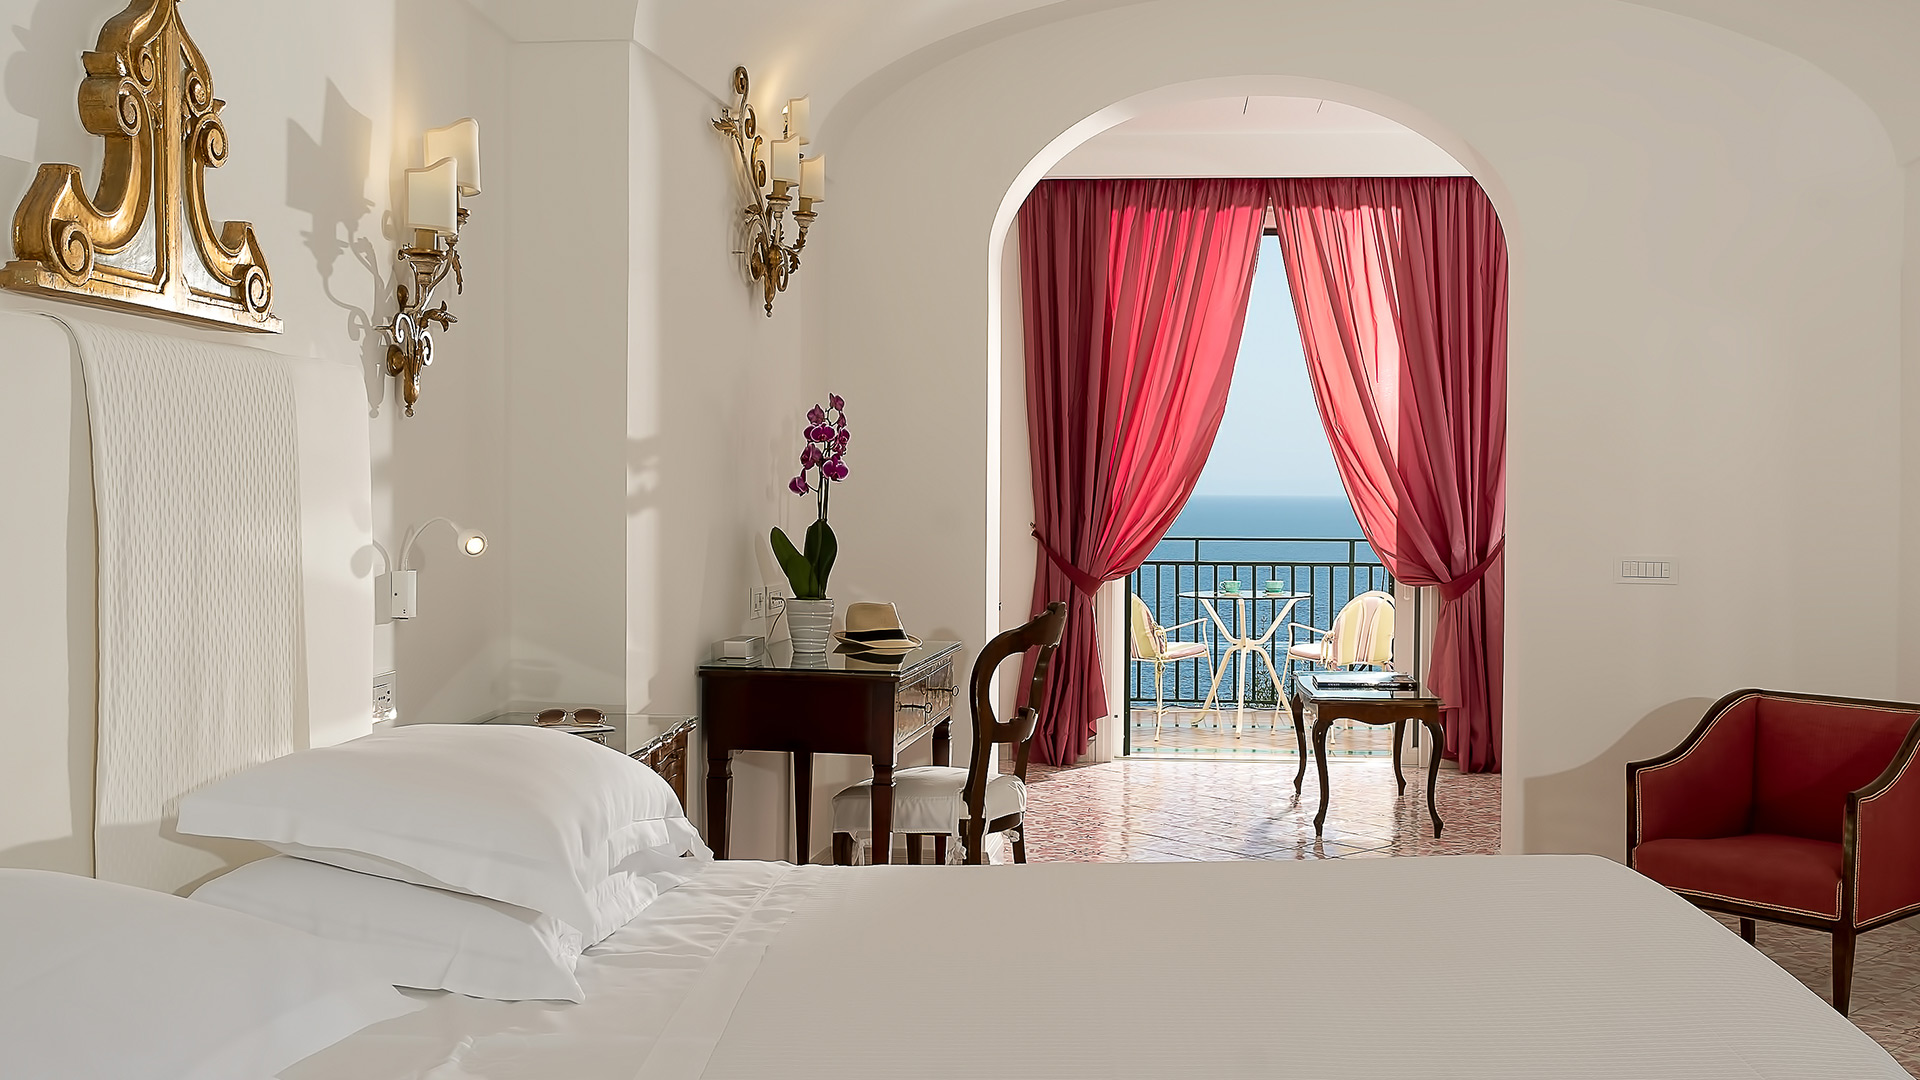 Hotel Santa Caterina is a timeless haven of elegance on Italy’s Amalfi Coast